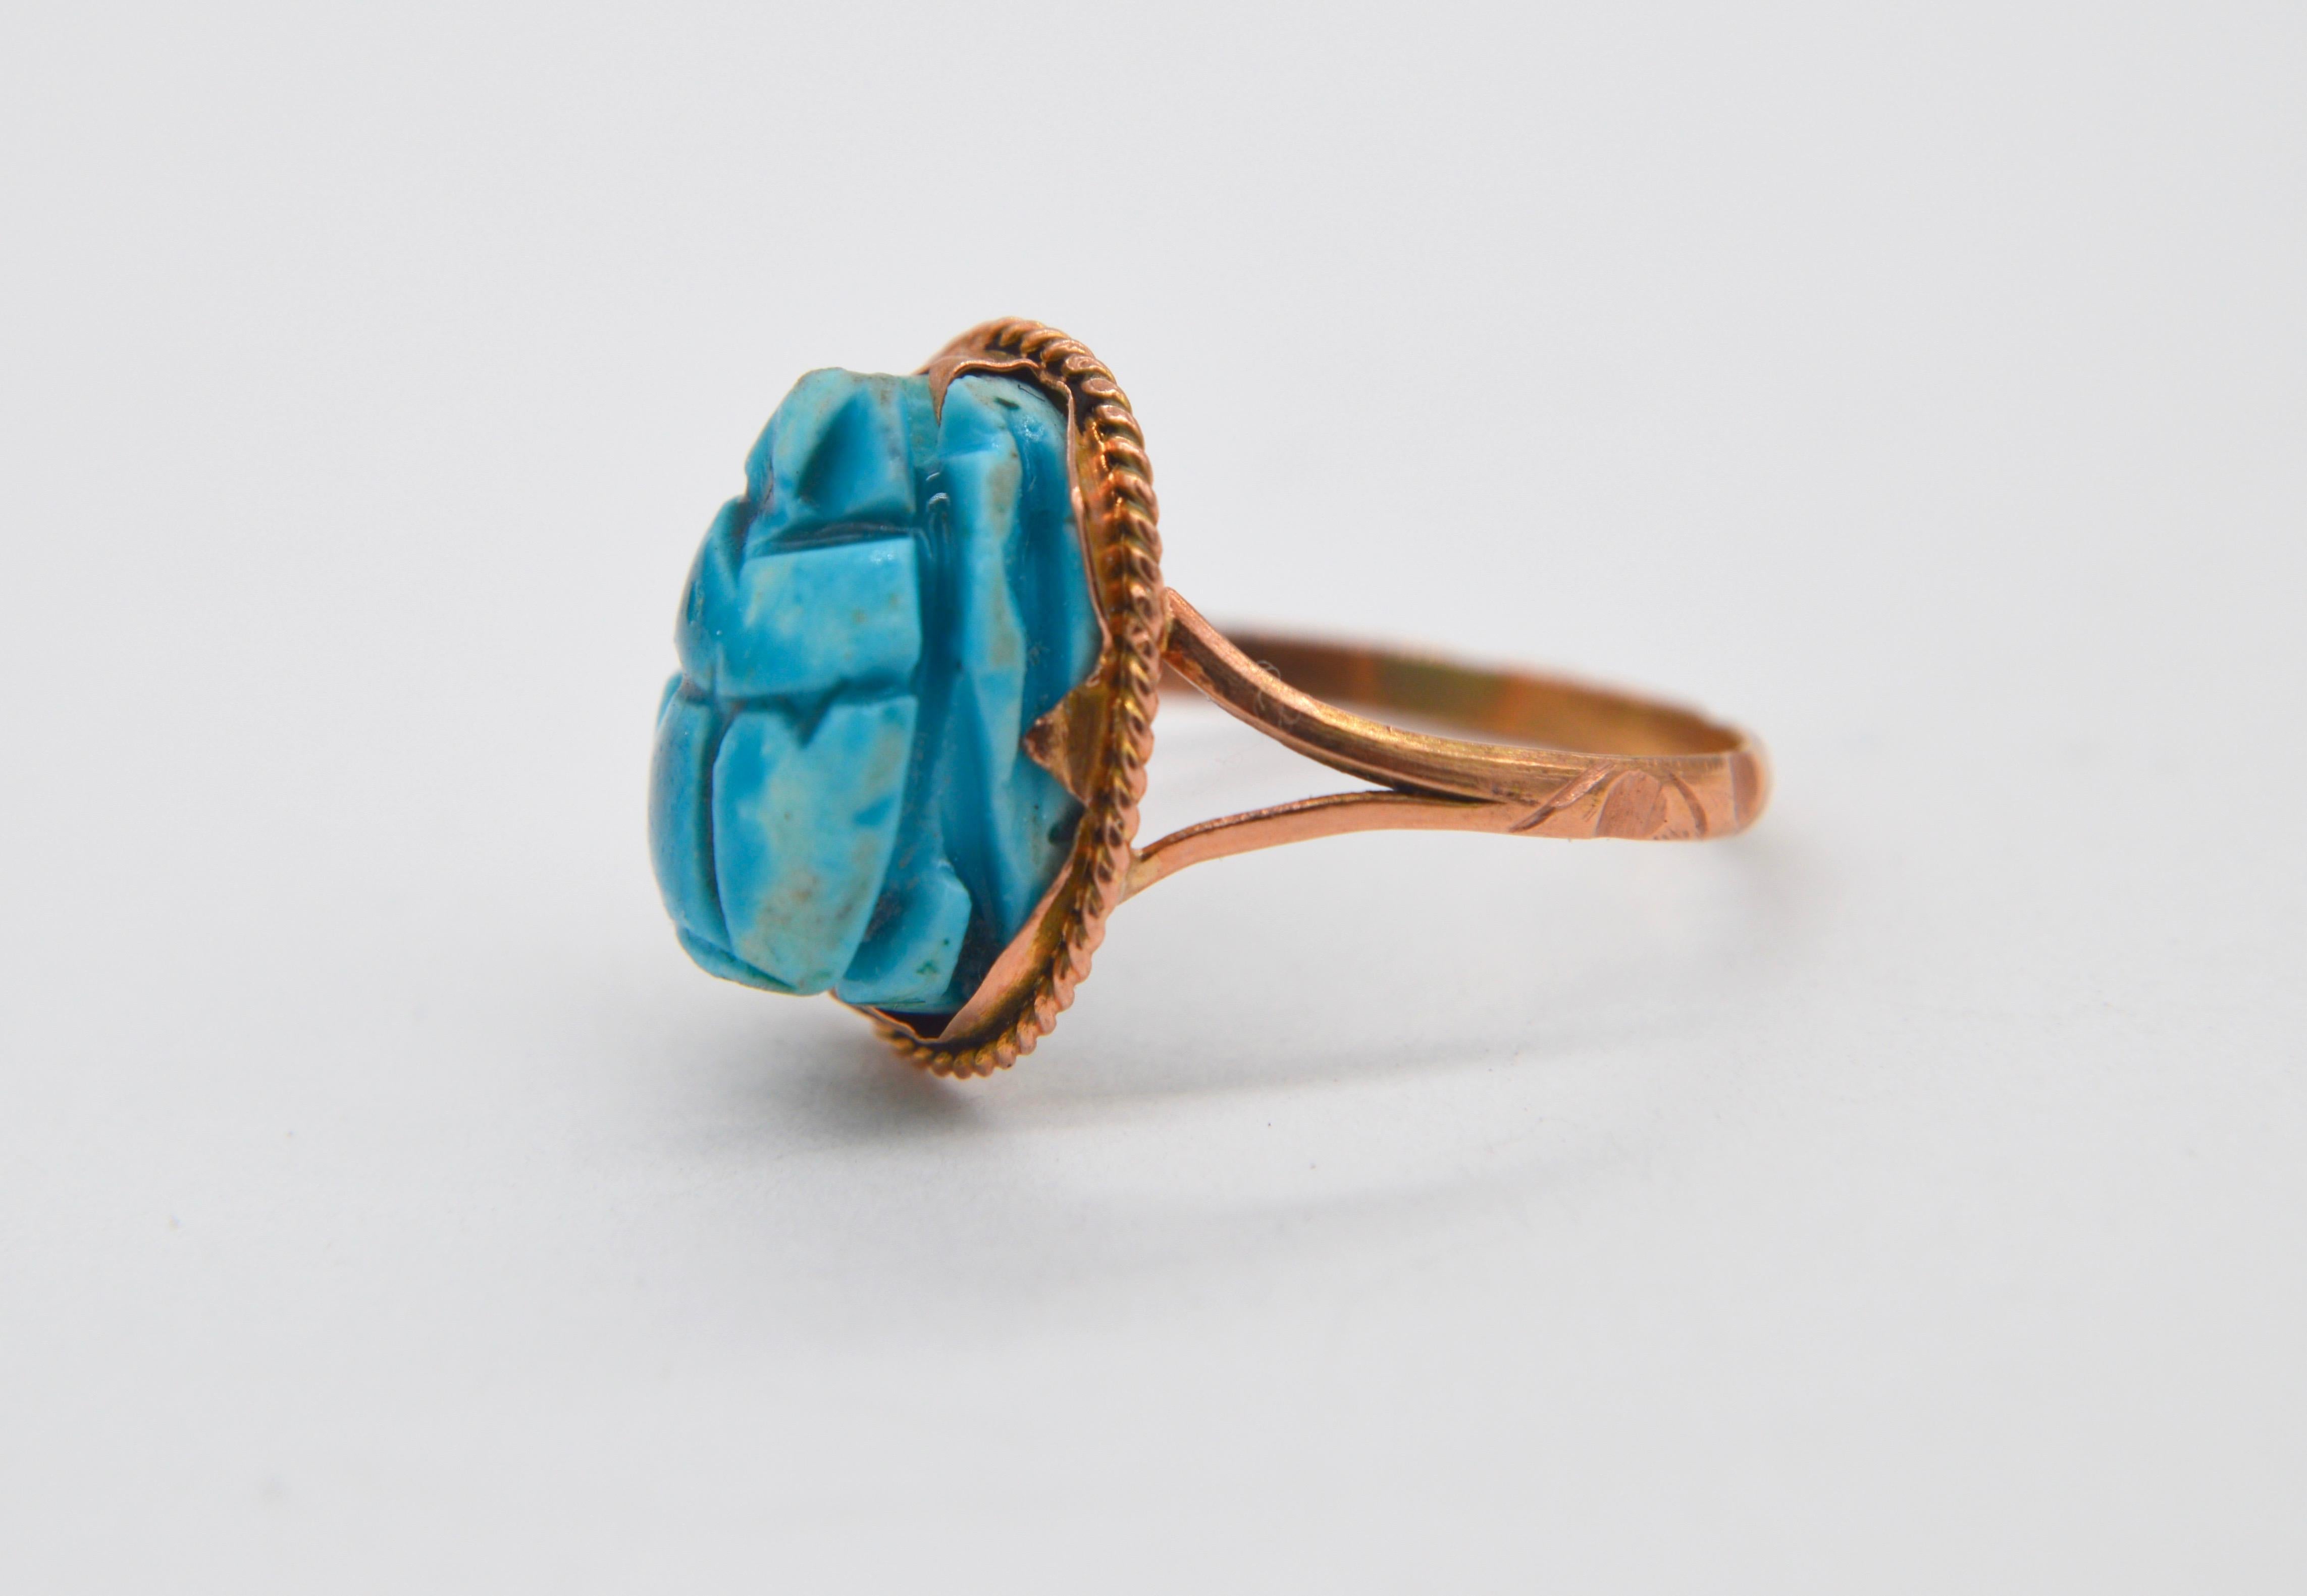 Beautiful Art Deco era circa 1920s antique faience turquoise glazed scarab beetle ring. Solid 18K rose gold setting. Ring has been tested as 18K. Has hieroglyphics stamped inside shank as pictured, The faience could be an original artifact from the